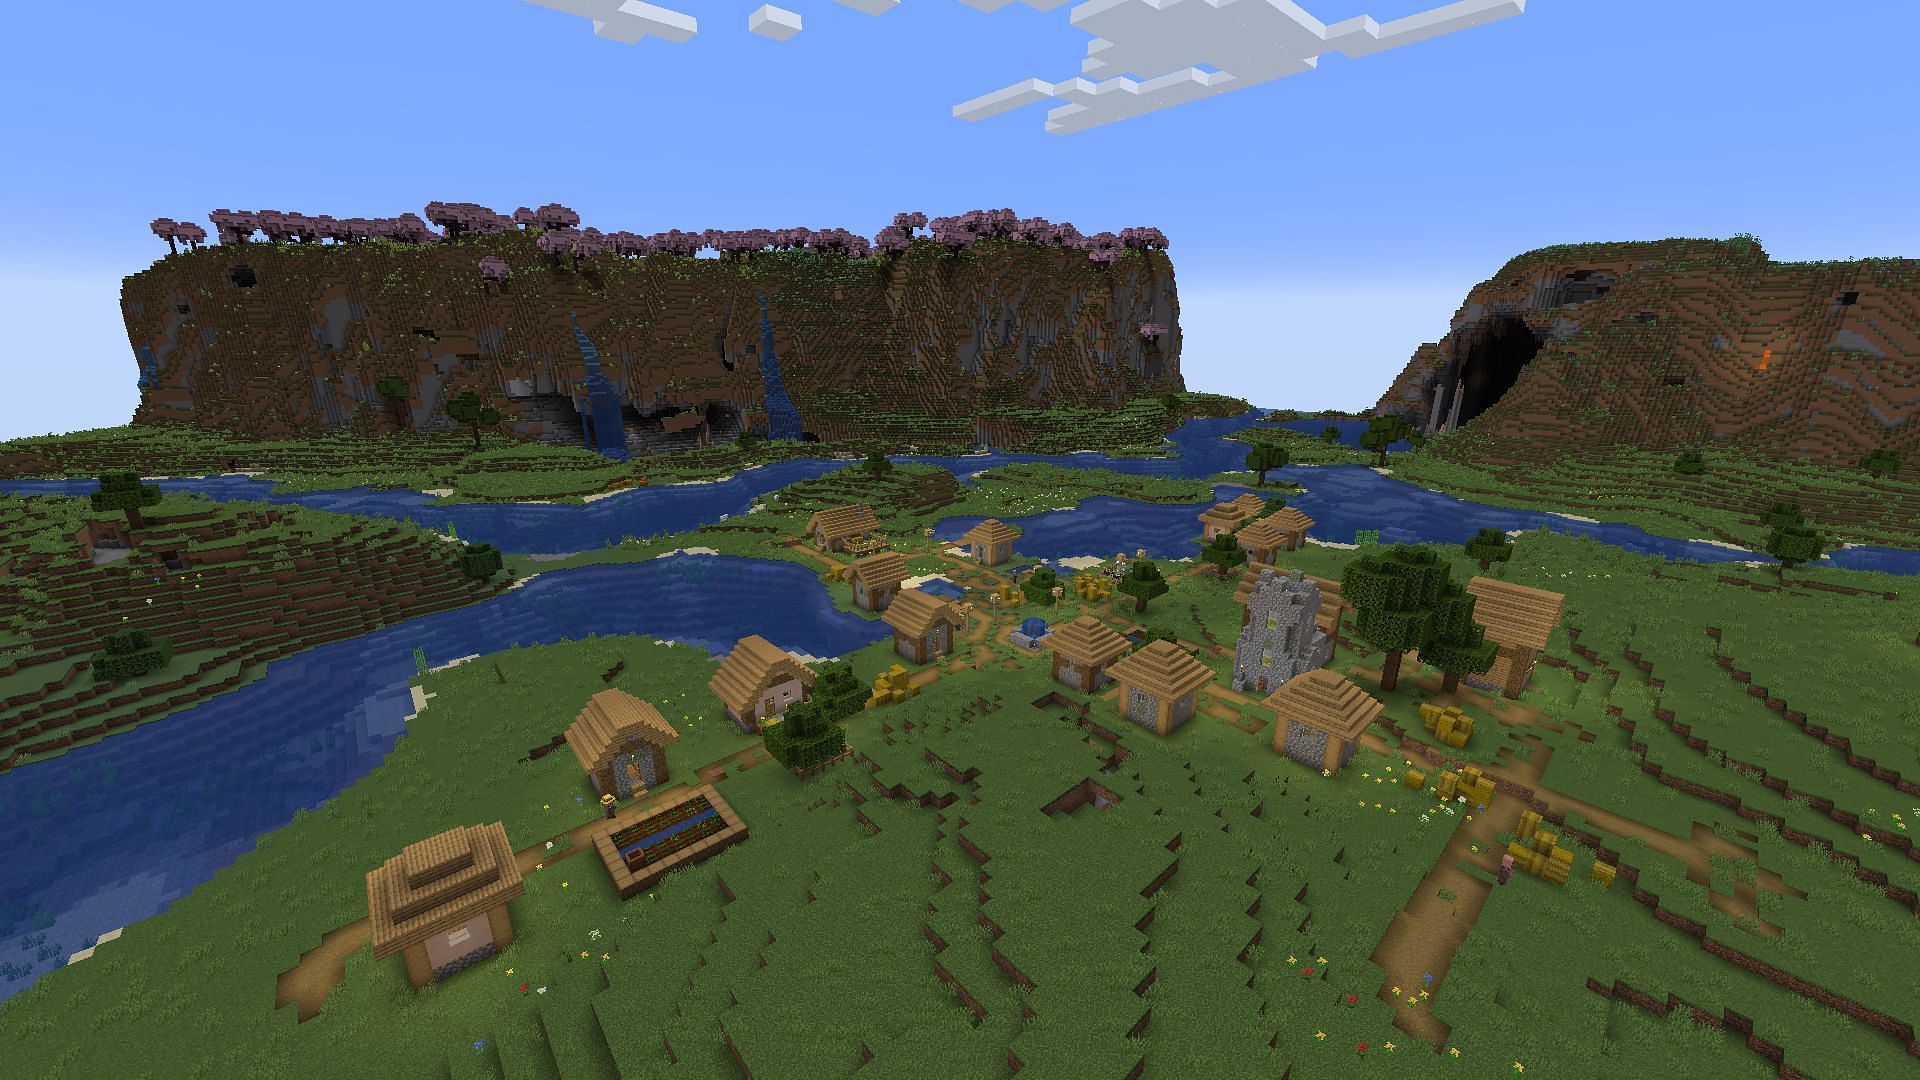 This Minecraft seed provides a village near the spawn with plenty of areas to explore nearby (Image via Mojang)